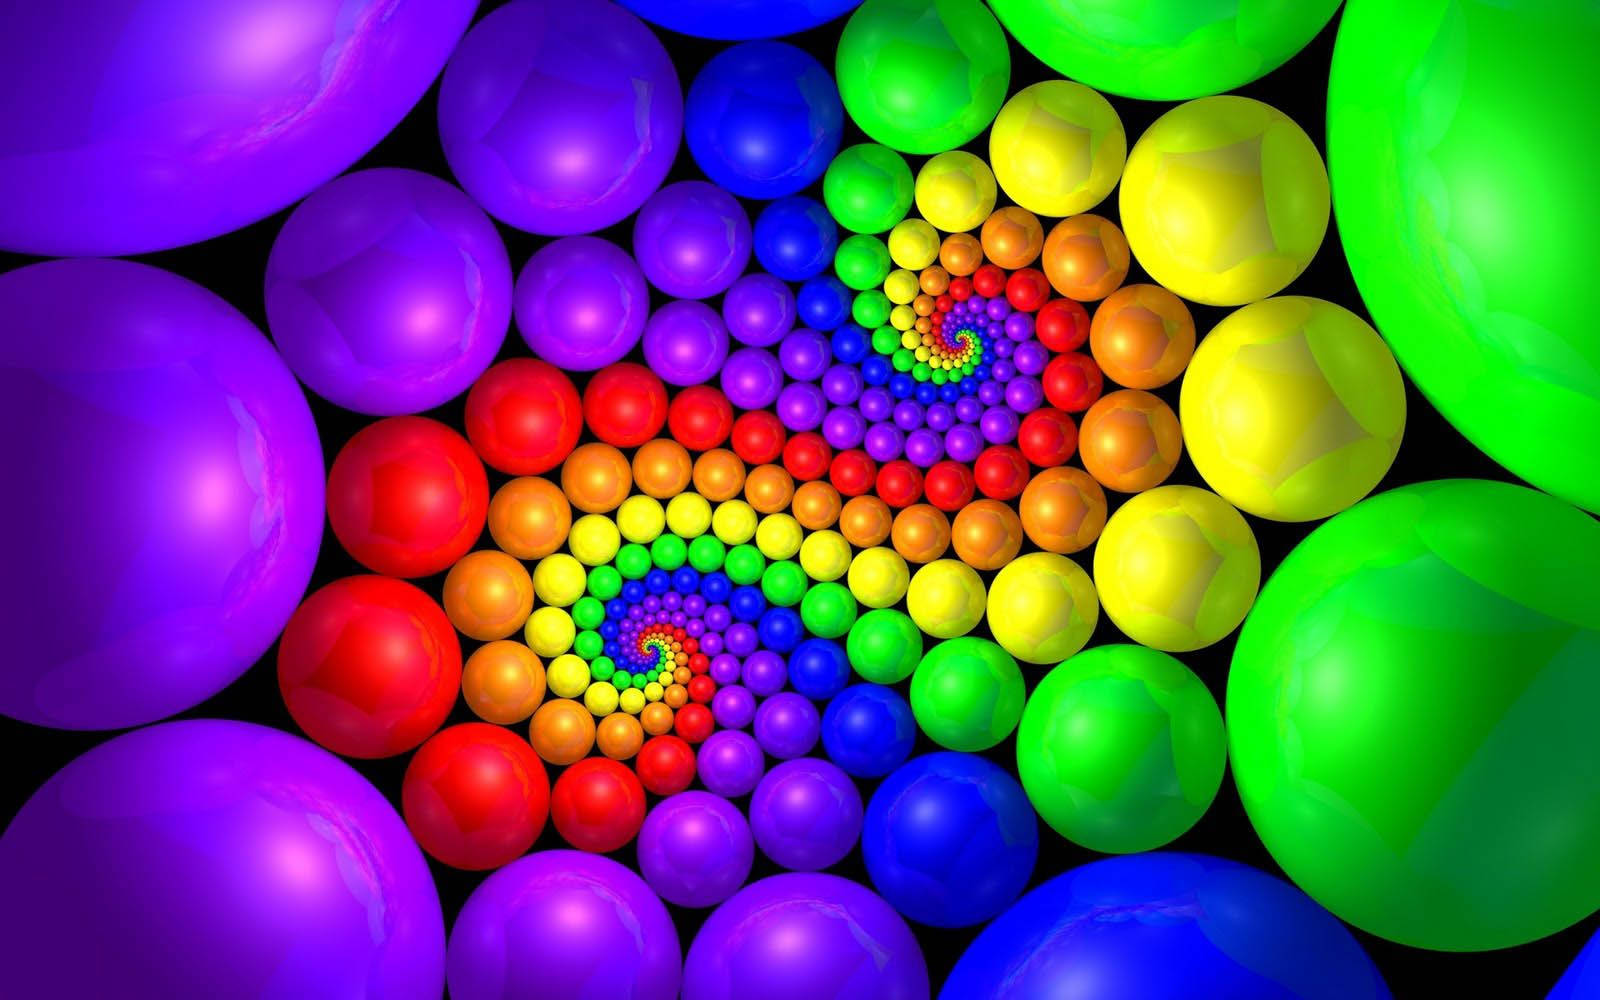 3d Colorful Balls In Swirling Design